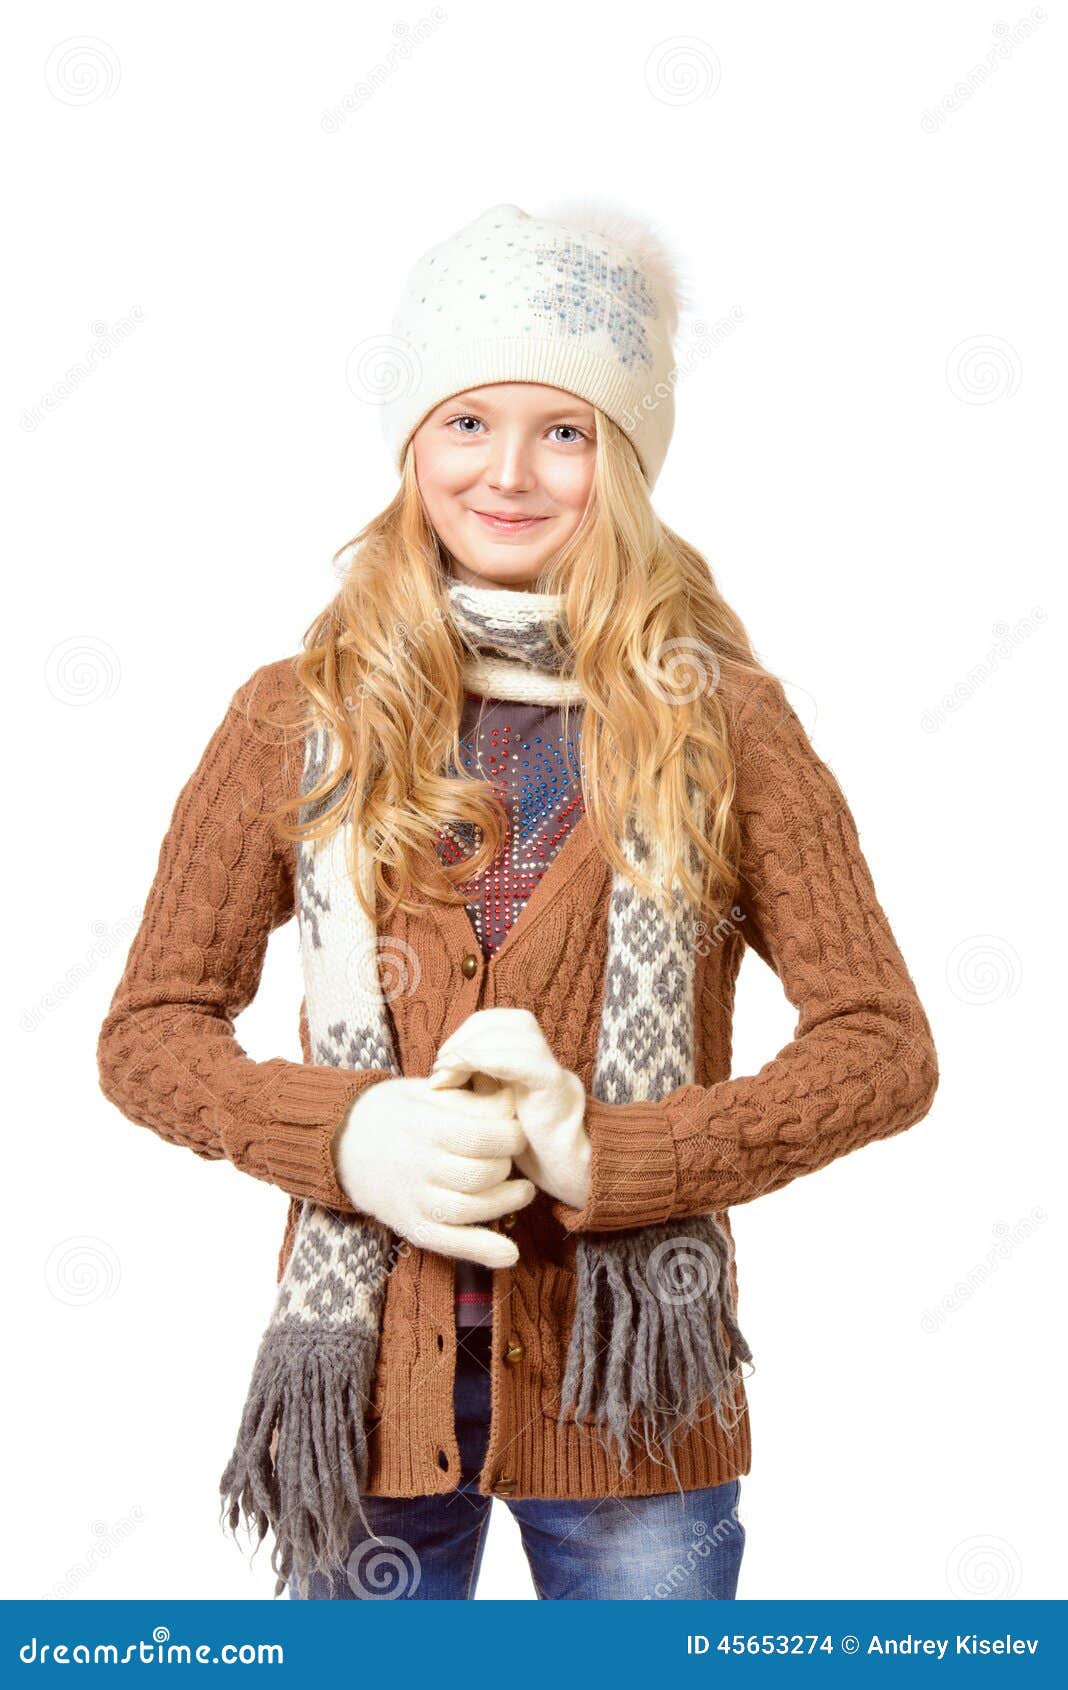 In sweater stock photo. Image of emotional, caucasian - 45653274